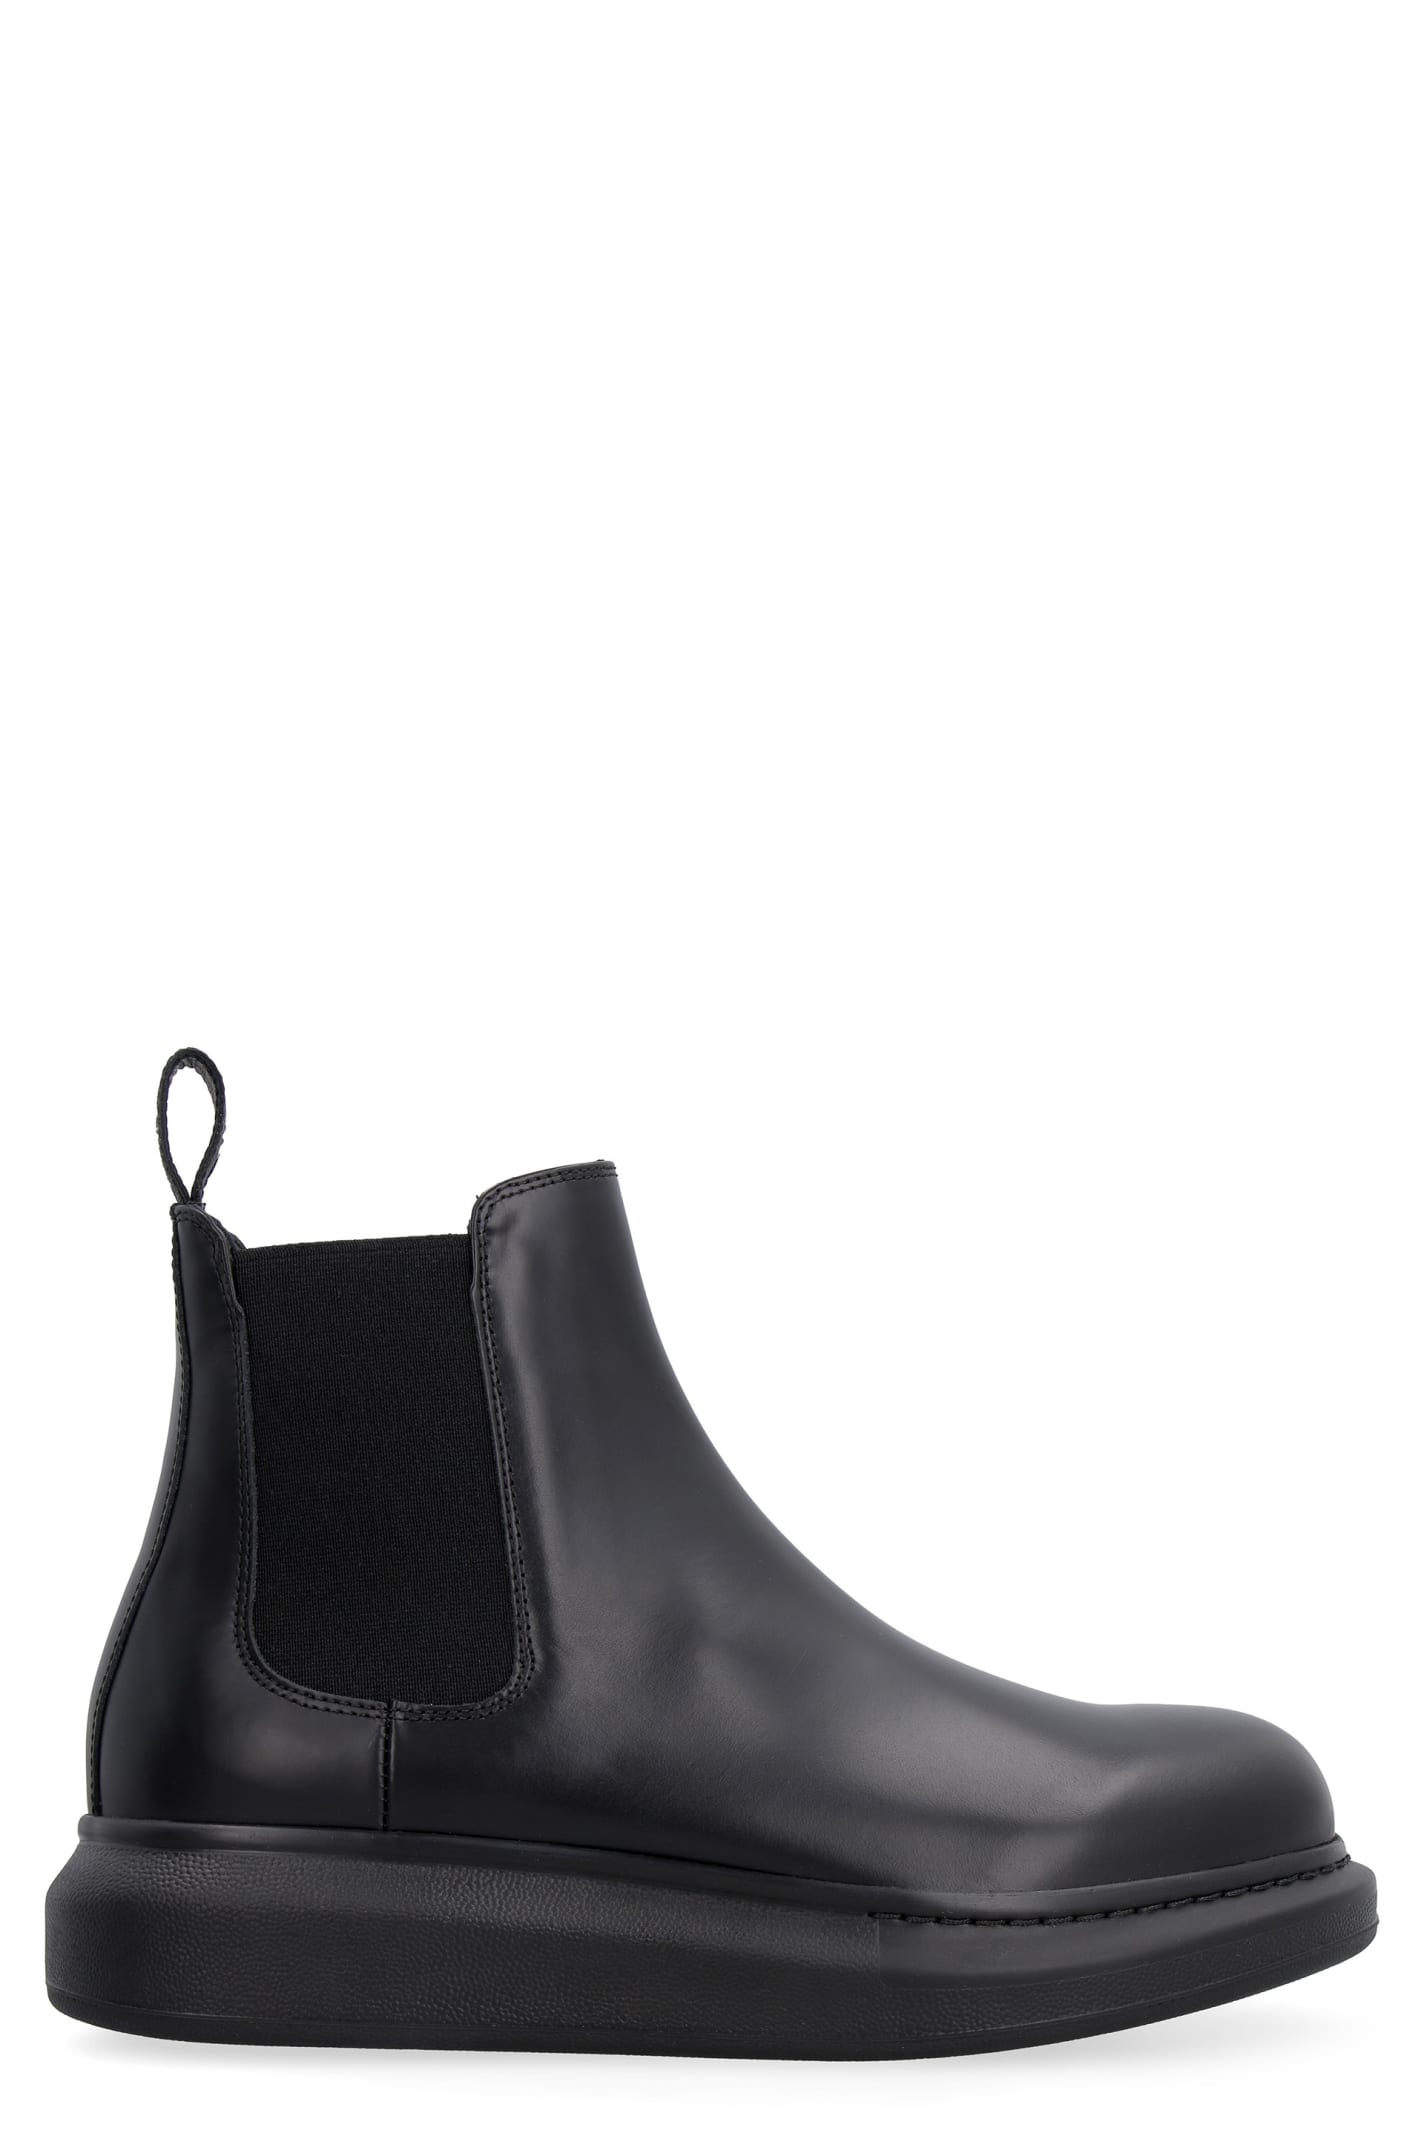 Alexander McQueen Hybrid Leather Chelsea Boots